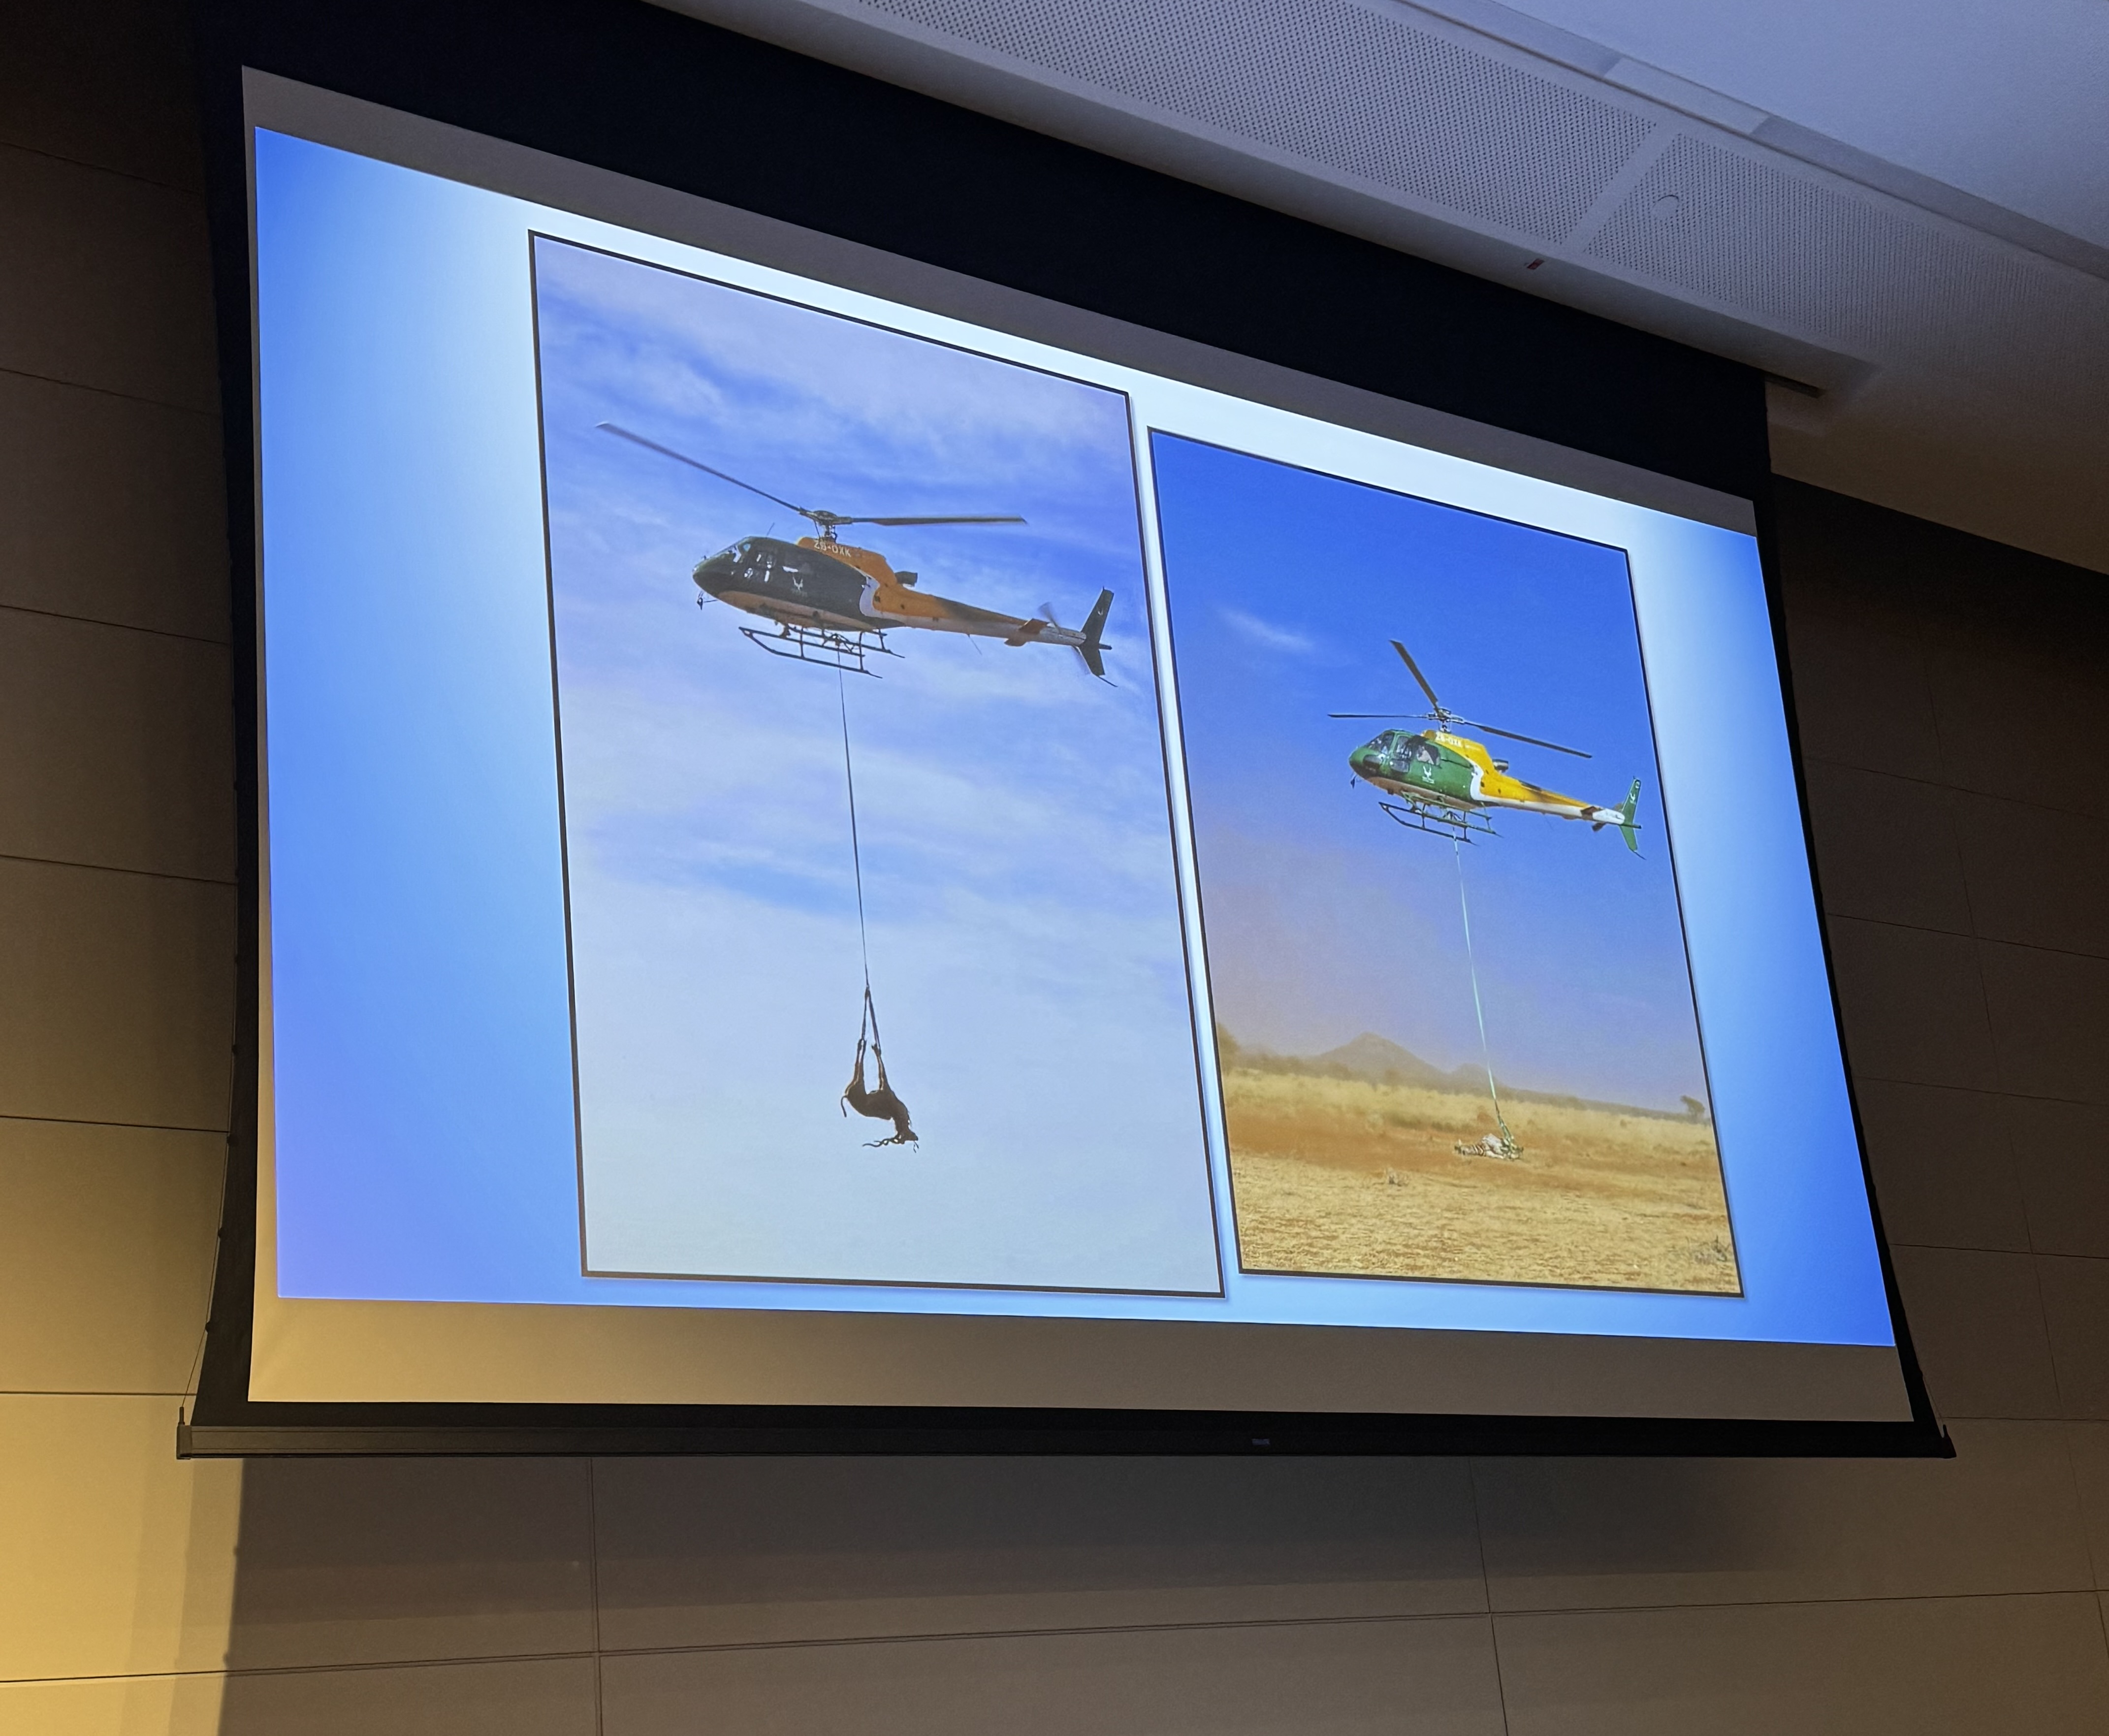 A slide from the Markus Hofmeyr lecture showing wildlife translocation using helicopters.